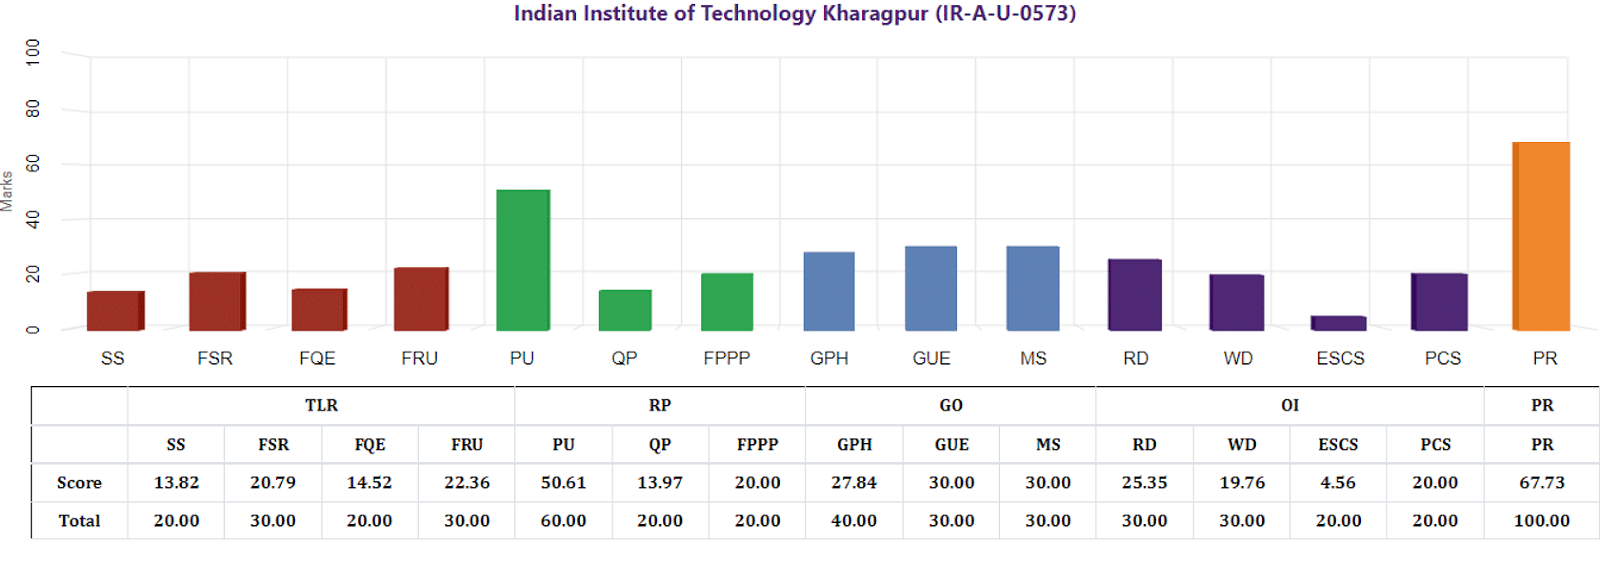 Find out the graphical data of parameter-wise scores of IIT Kharagpur’s Architecture rankings by NIRF 2023: